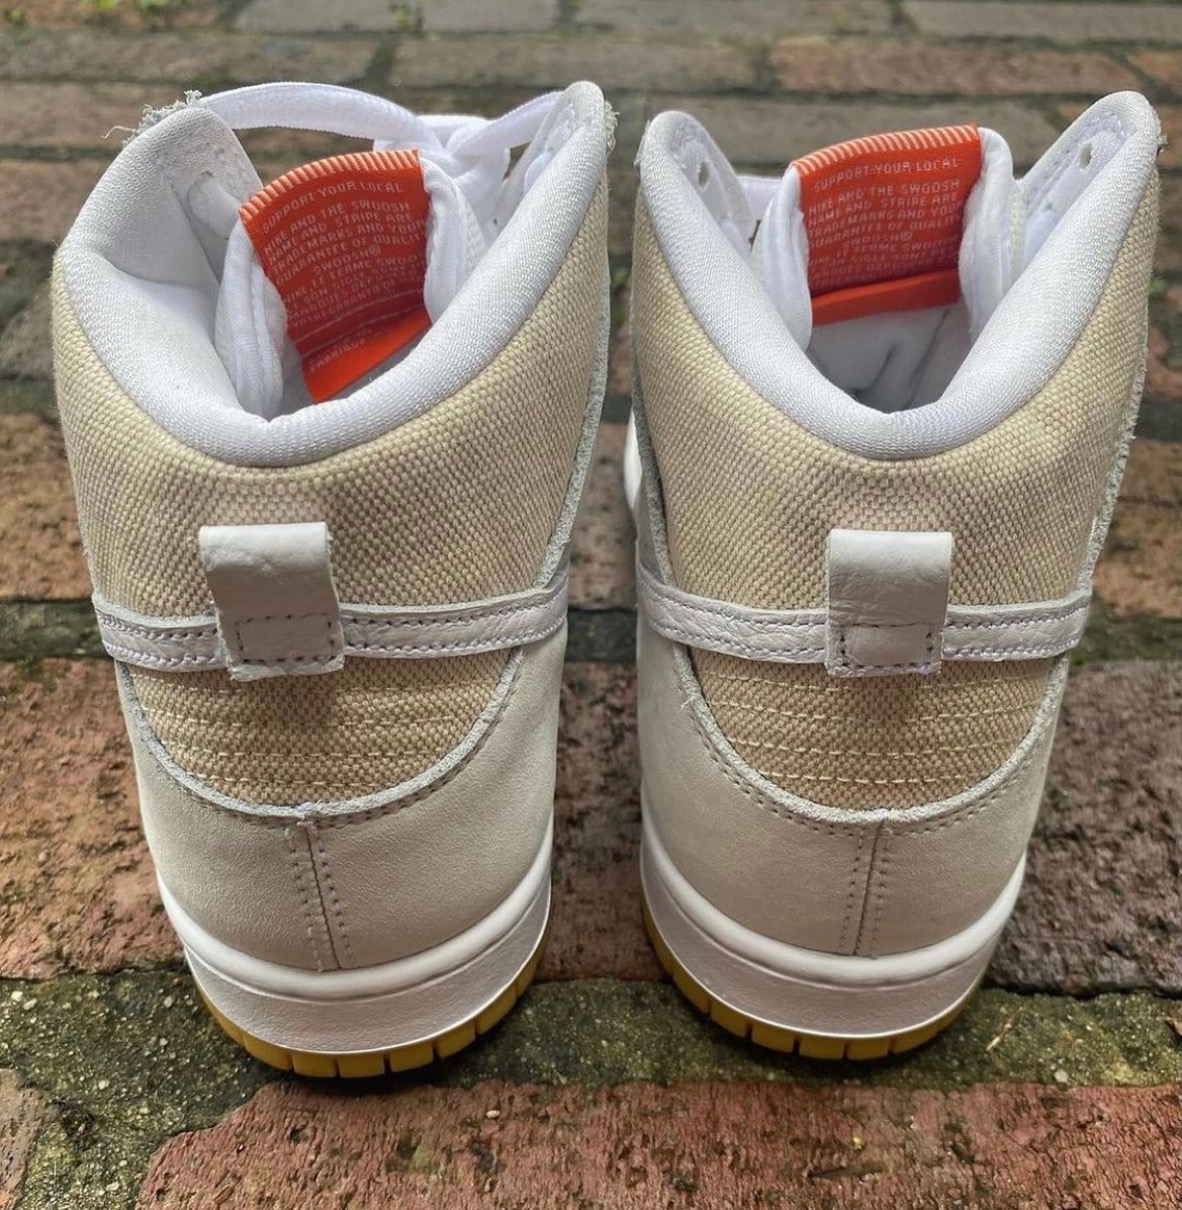 Nike Dunk High Pro ISO “Unbleached Sailになります